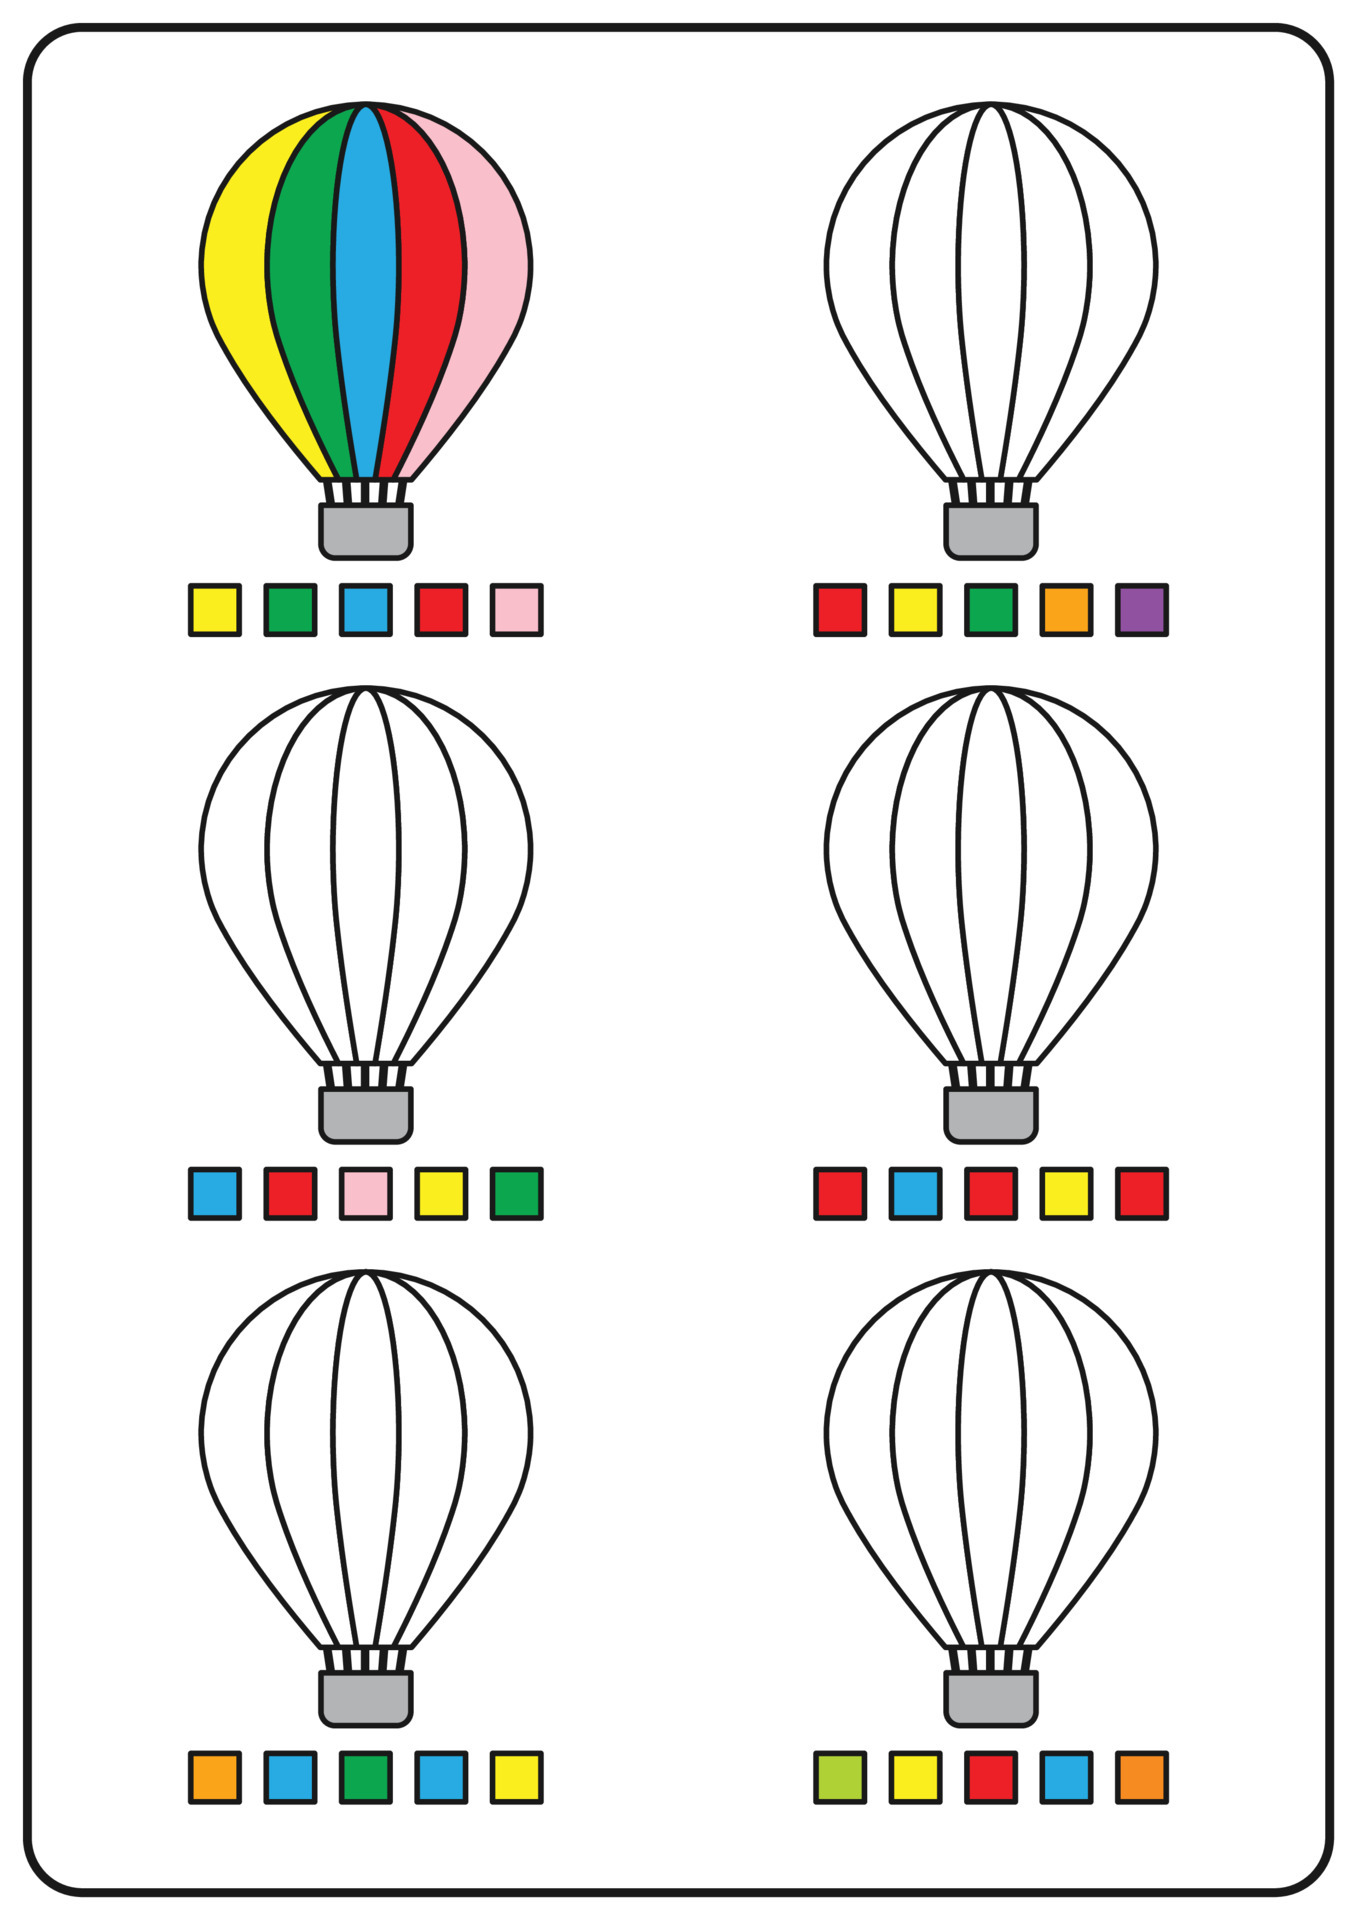 Coloring pages, educational games for children, preschool activities,  printable worksheets. Simple cartoon vector illustration of colorful  objects to learn colors. Coloring hot air balloons. 6187417 Vector Art at  Vecteezy